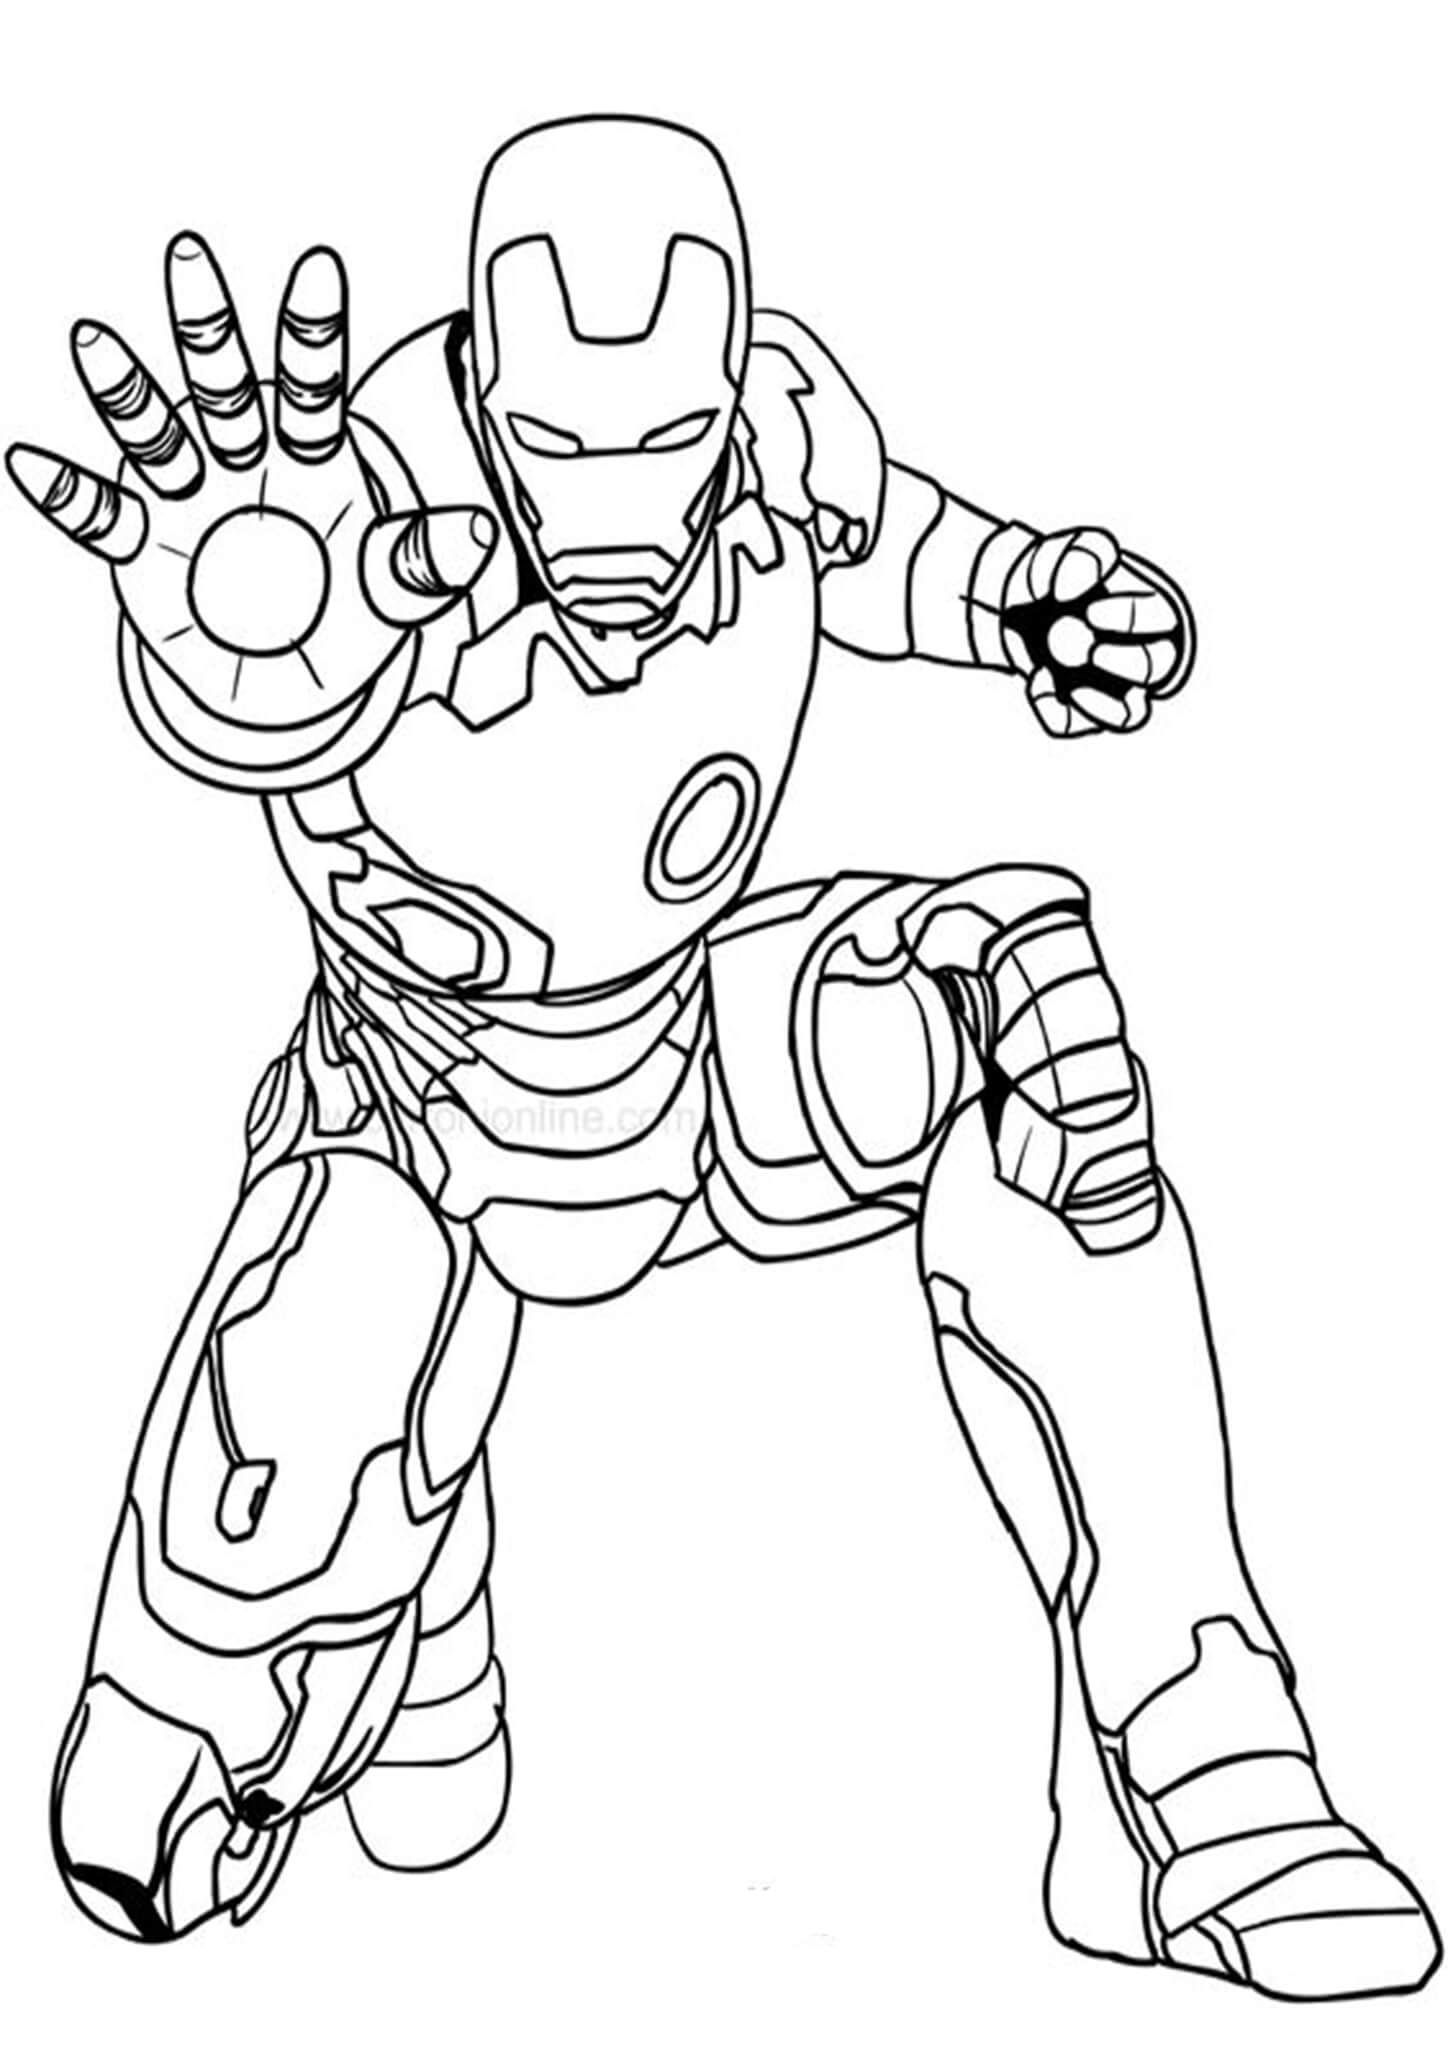 Free easy to print iron man coloring pages superhero coloring pages superhero coloring avengers coloring pages